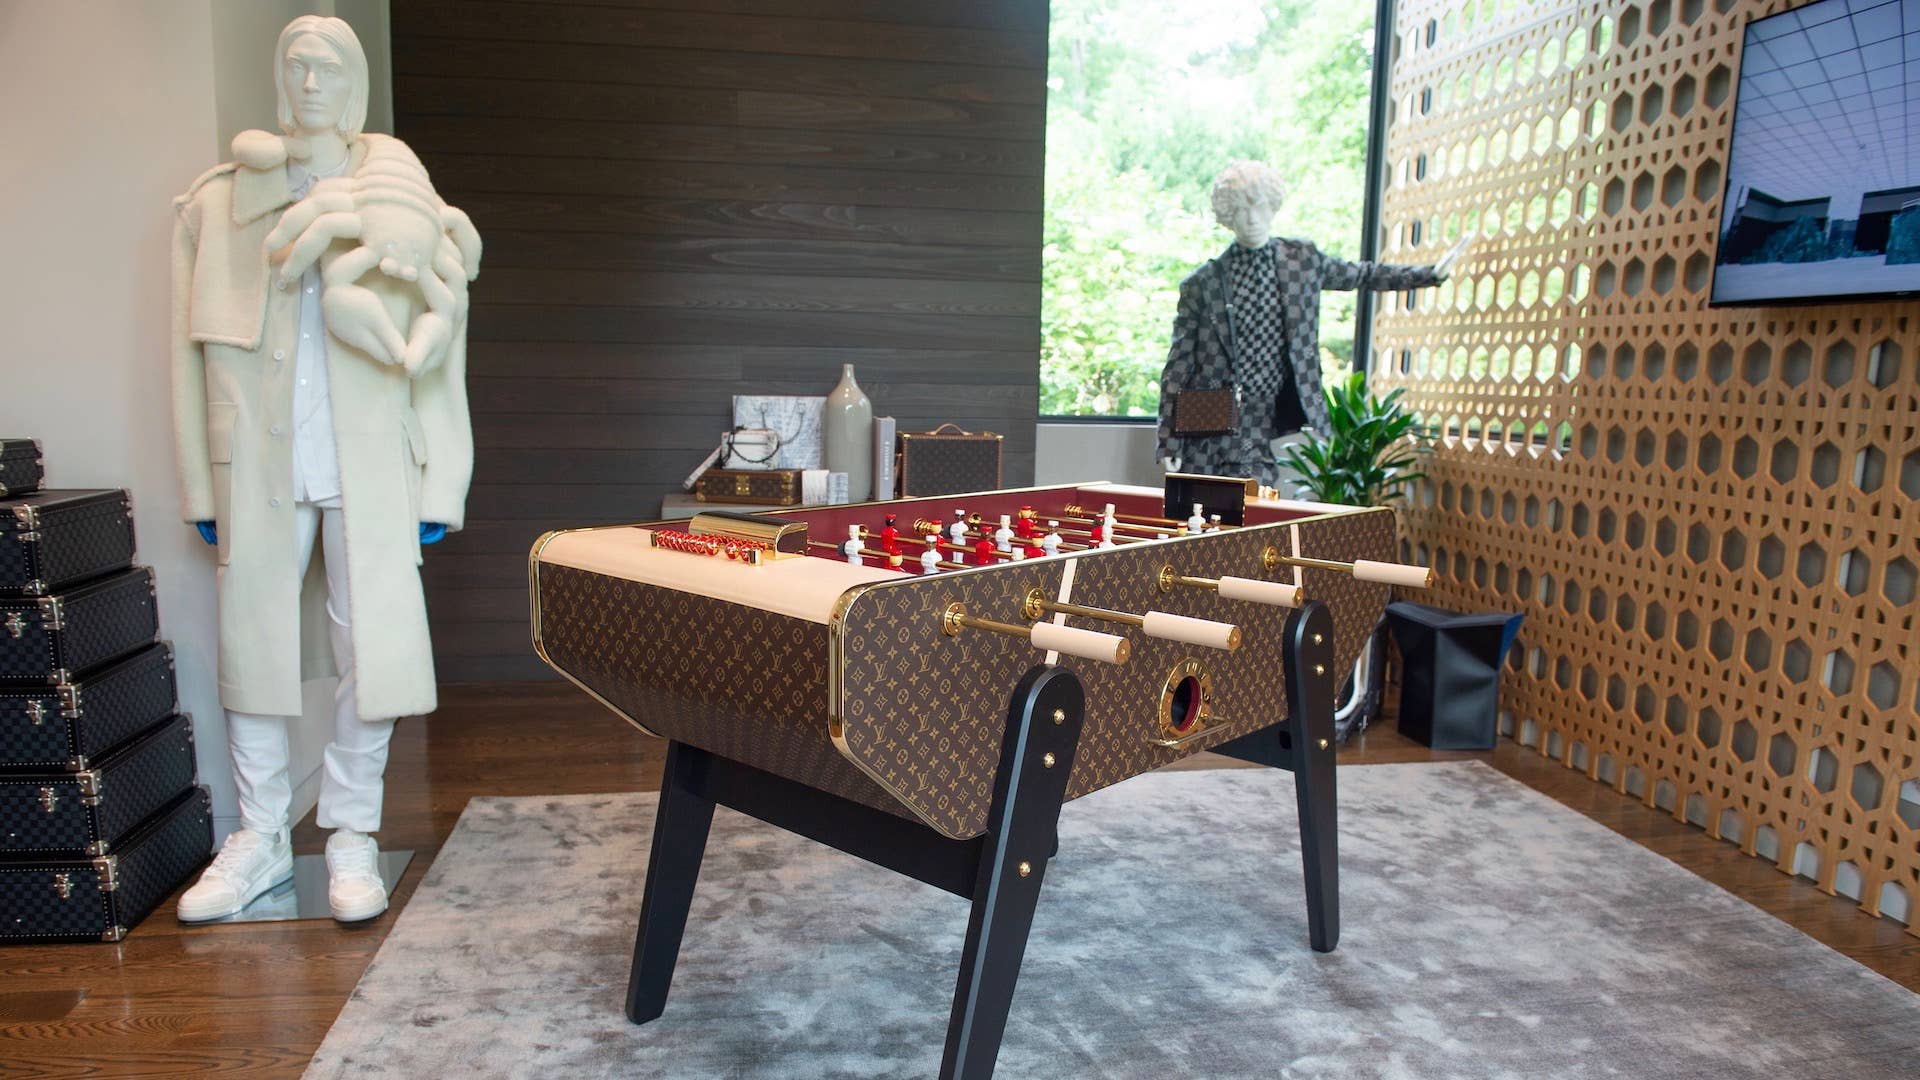 Louis Vuitton Showcases Its Menswear, Timepieces, and More in Famed Atlanta  Residence